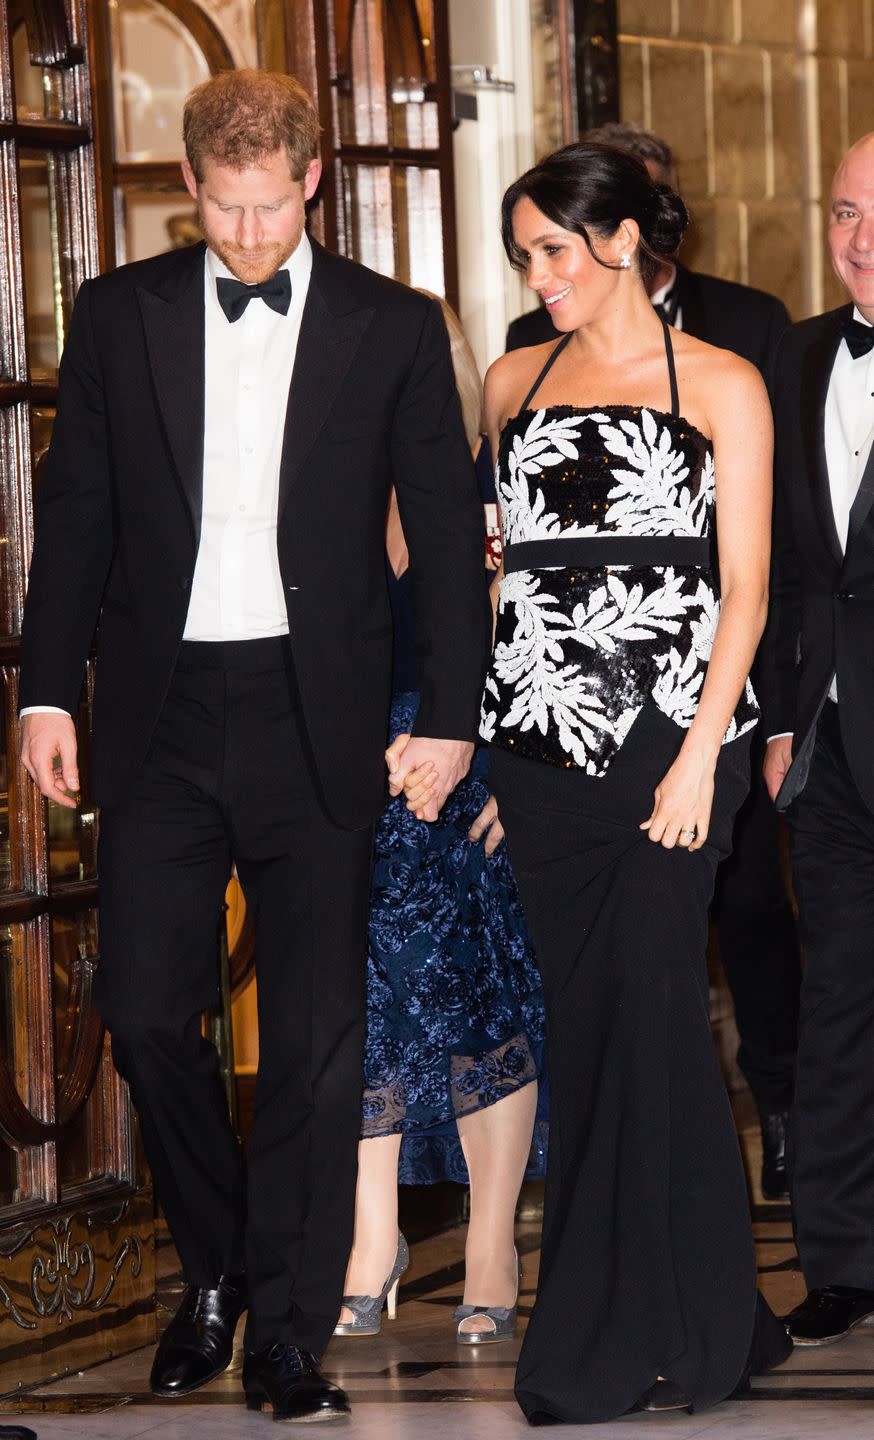 <p>Arriving at the London Palladium, the pregnant royal looked sparkly in a £895 sequin halter-neck top with a leaf pattern and a £850 maxi skirt by London-based designer <a href="https://www.safiyaa.com/collections/tops/products/malaya-strapless-top" rel="nofollow noopener" target="_blank" data-ylk="slk:Safiyaa;elm:context_link;itc:0;sec:content-canvas" class="link ">Safiyaa</a>, whose clothing she first wore <a href="https://www.elle.com/uk/fashion/celebrity-style/a23813894/meghan-markle-prince-harry-royal-tour-style-outfits/" rel="nofollow noopener" target="_blank" data-ylk="slk:during her royal tour of Fiji last month;elm:context_link;itc:0;sec:content-canvas" class="link ">during her royal tour of Fiji last month</a>.</p><p>She teamed the look with a black and gold clutch bag, <a href="https://www.farfetch.com/uk/shopping/women/aquazzura-simply-irresistible-pumps-item-12141243.aspx?storeid=11146&size=26&pid=googleadwords_int&af_channel=Search&c=629762120&af_c_id=629762120&af_keywords=aud-301601826227%3Apla-383089413039&af_adset_id=52804059504&af_ad_id=218064673083&is_retargeting=true&shopping=yes&gclid=Cj0KCQiA_s7fBRDrARIsAGEvF8Qg63WdSbrlYG0AqwP-LgbYQpBffN-YMnO6vLsSrmyeL2NhnQMMsdcaAgPIEALw_wcB" rel="nofollow noopener" target="_blank" data-ylk="slk:black high-heeled Aquazzura pumps;elm:context_link;itc:0;sec:content-canvas" class="link ">black high-heeled Aquazzura pumps</a>, and <a href="https://www.maisonbirks.com/en/birks-snowflake-snowstorm-diamond-earrings-in-white-gold" rel="nofollow noopener" target="_blank" data-ylk="slk:Snowstorm earrings;elm:context_link;itc:0;sec:content-canvas" class="link ">Snowstorm earrings</a> from Canadian jewellery brand Birks.</p>